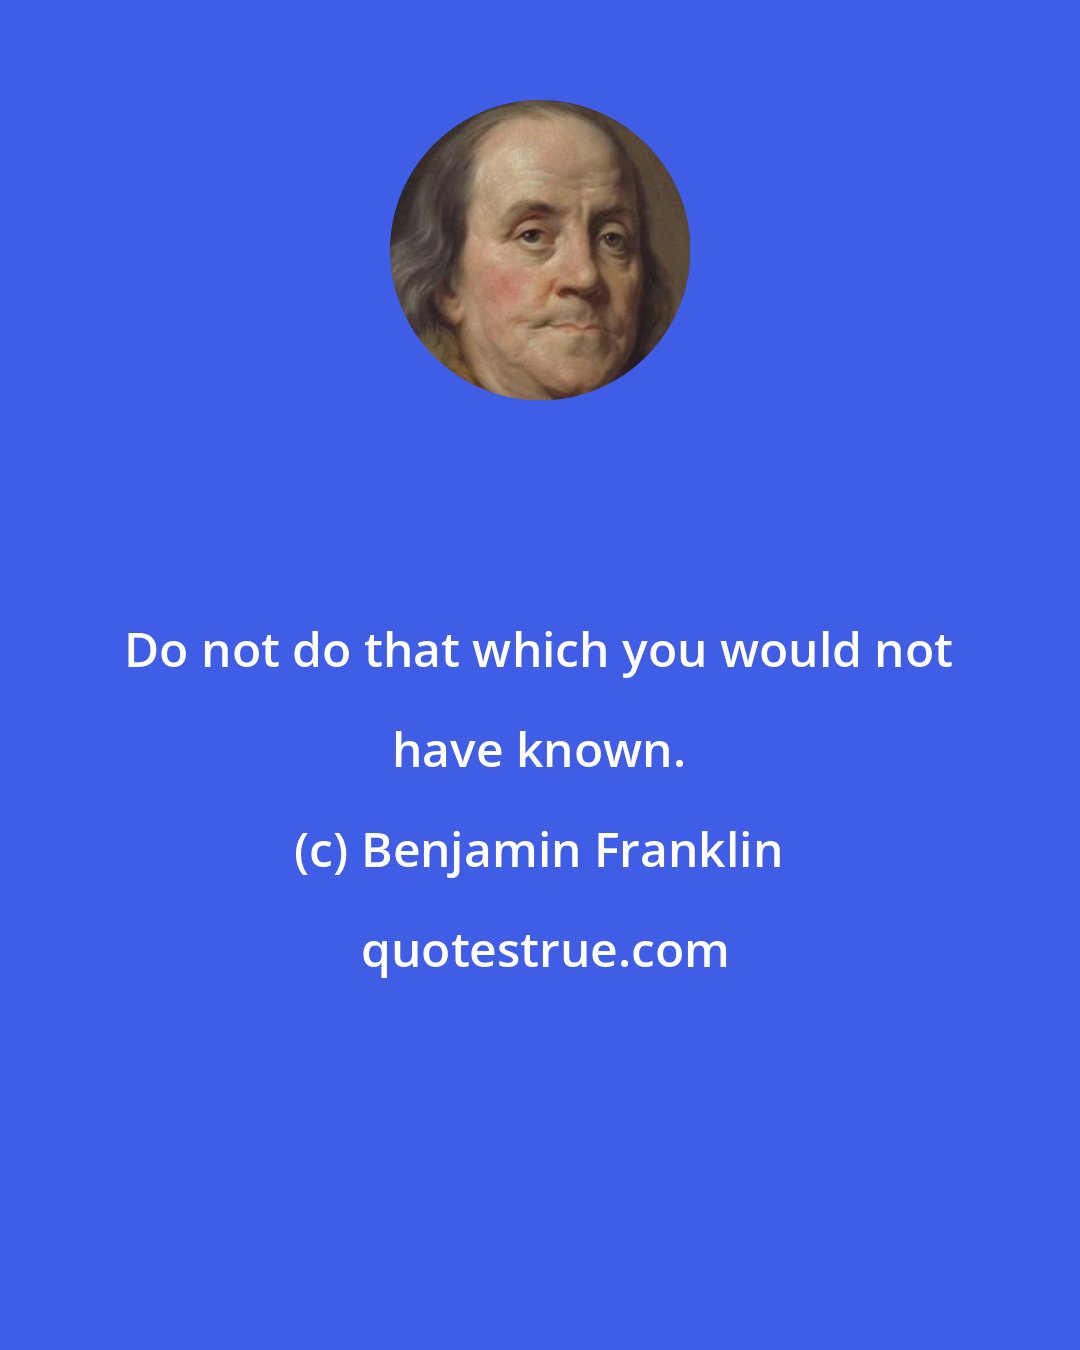 Benjamin Franklin: Do not do that which you would not have known.